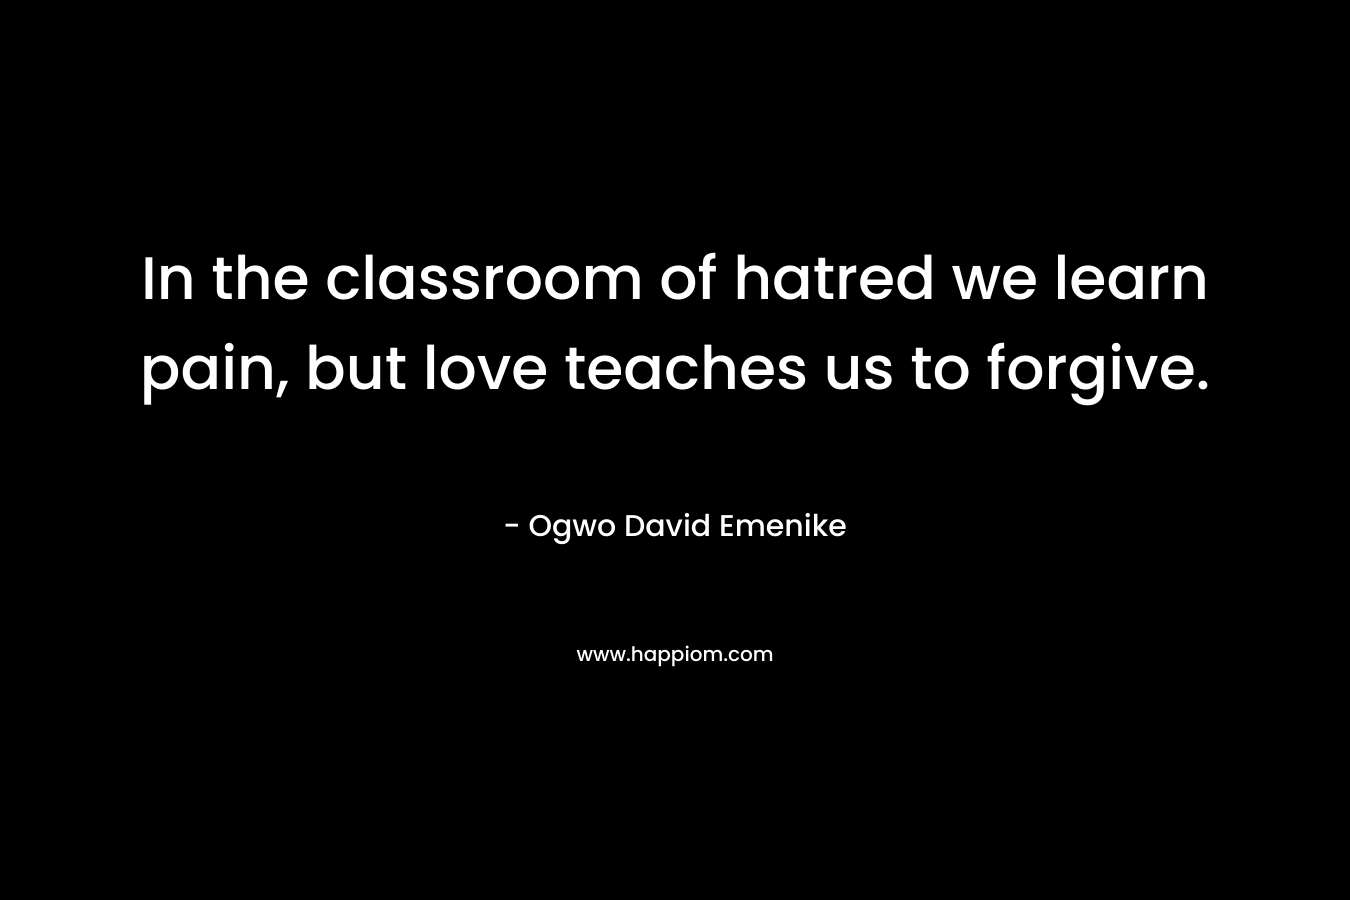 In the classroom of hatred we learn pain, but love teaches us to forgive. – Ogwo David Emenike